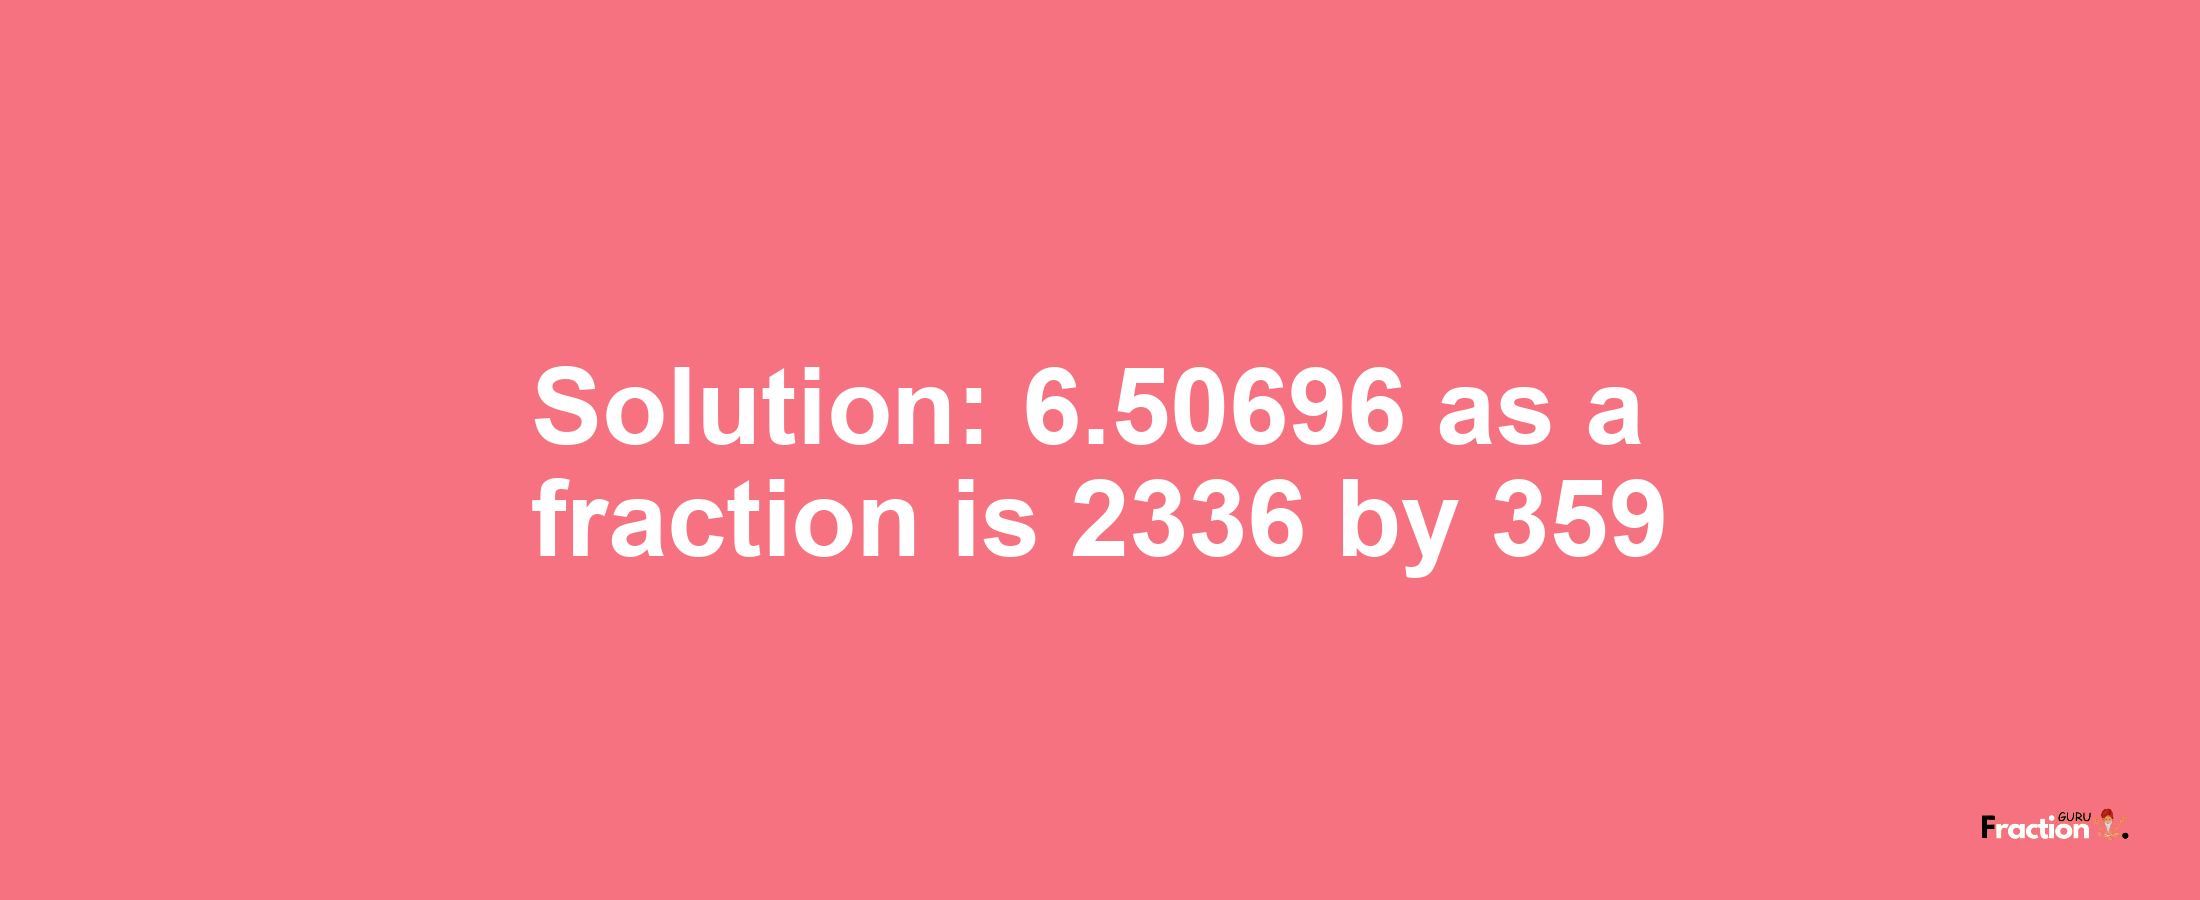 Solution:6.50696 as a fraction is 2336/359